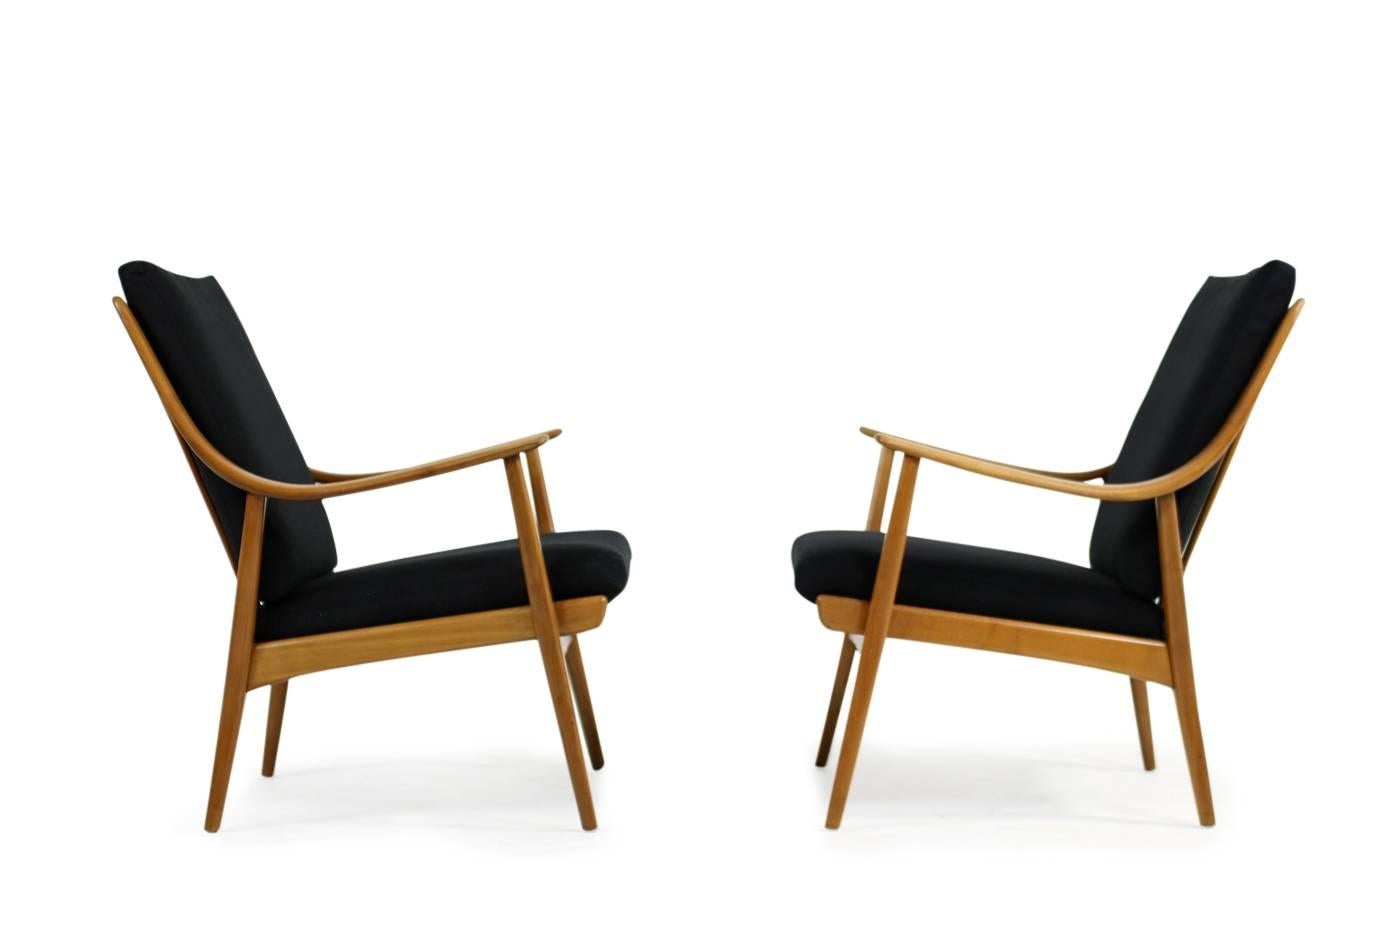 Beautiful pair of 1950s Mid-Century easy chairs, unknown designer, probably prototypes or an individual production, purchased in 1956. Very good condition, fantastic beechwood in original condition, renewed upholstery and covered with new, black